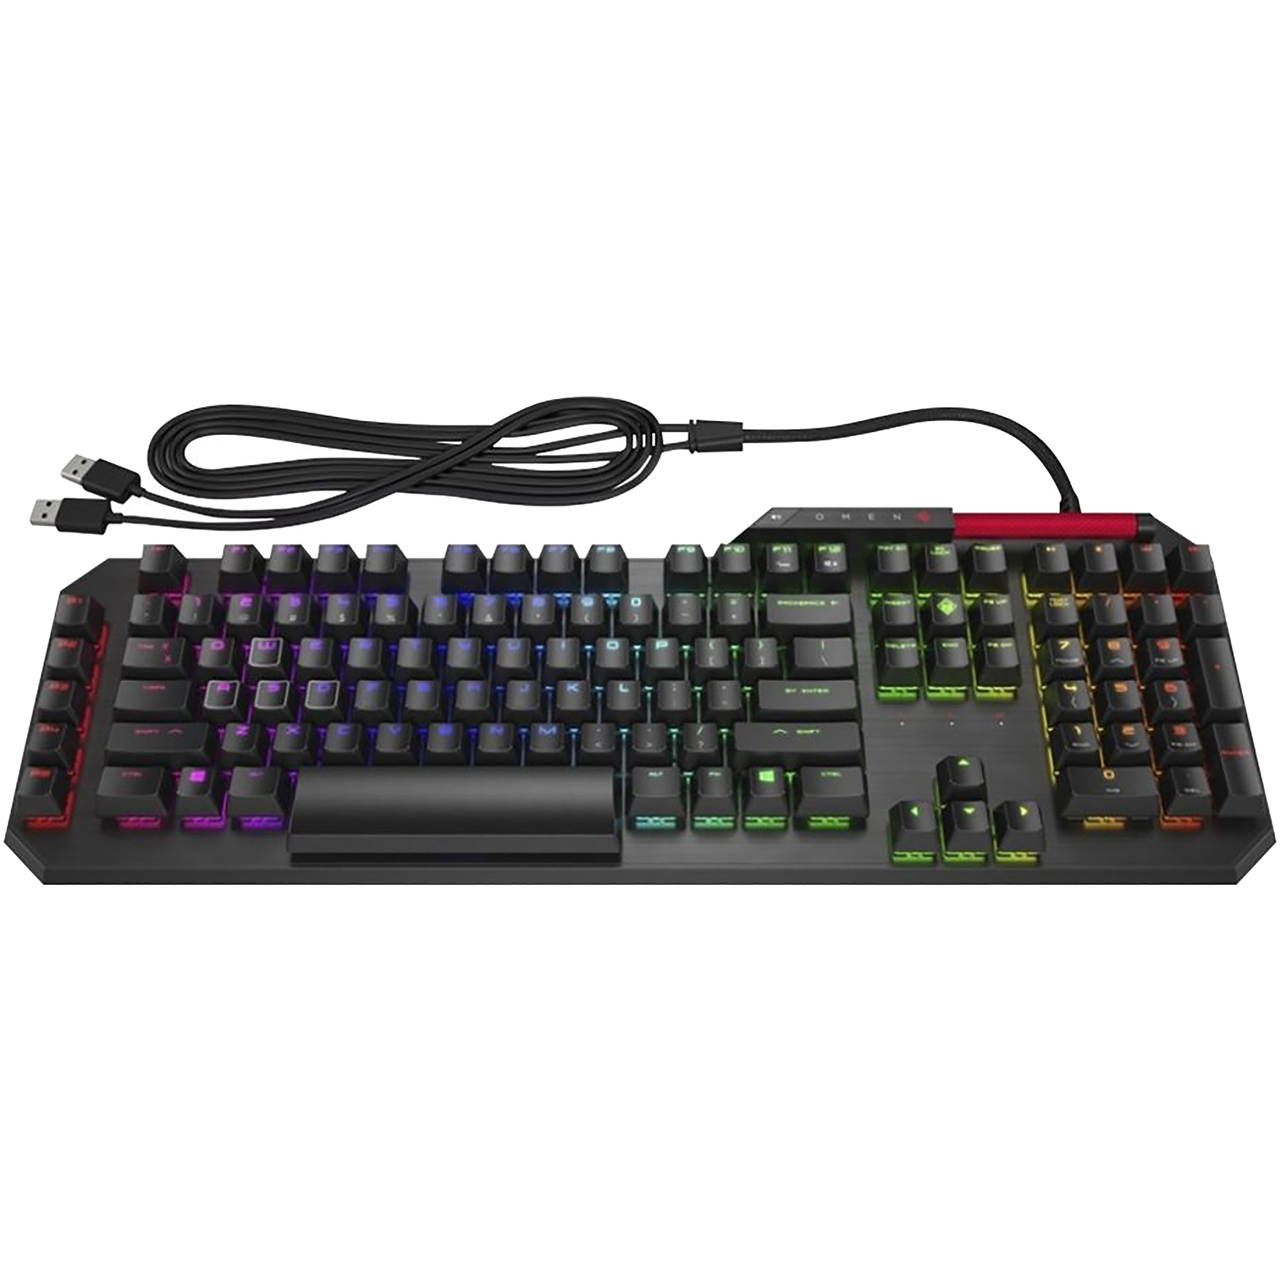 HP OMEN Wired USB Gaming Keyboard Review